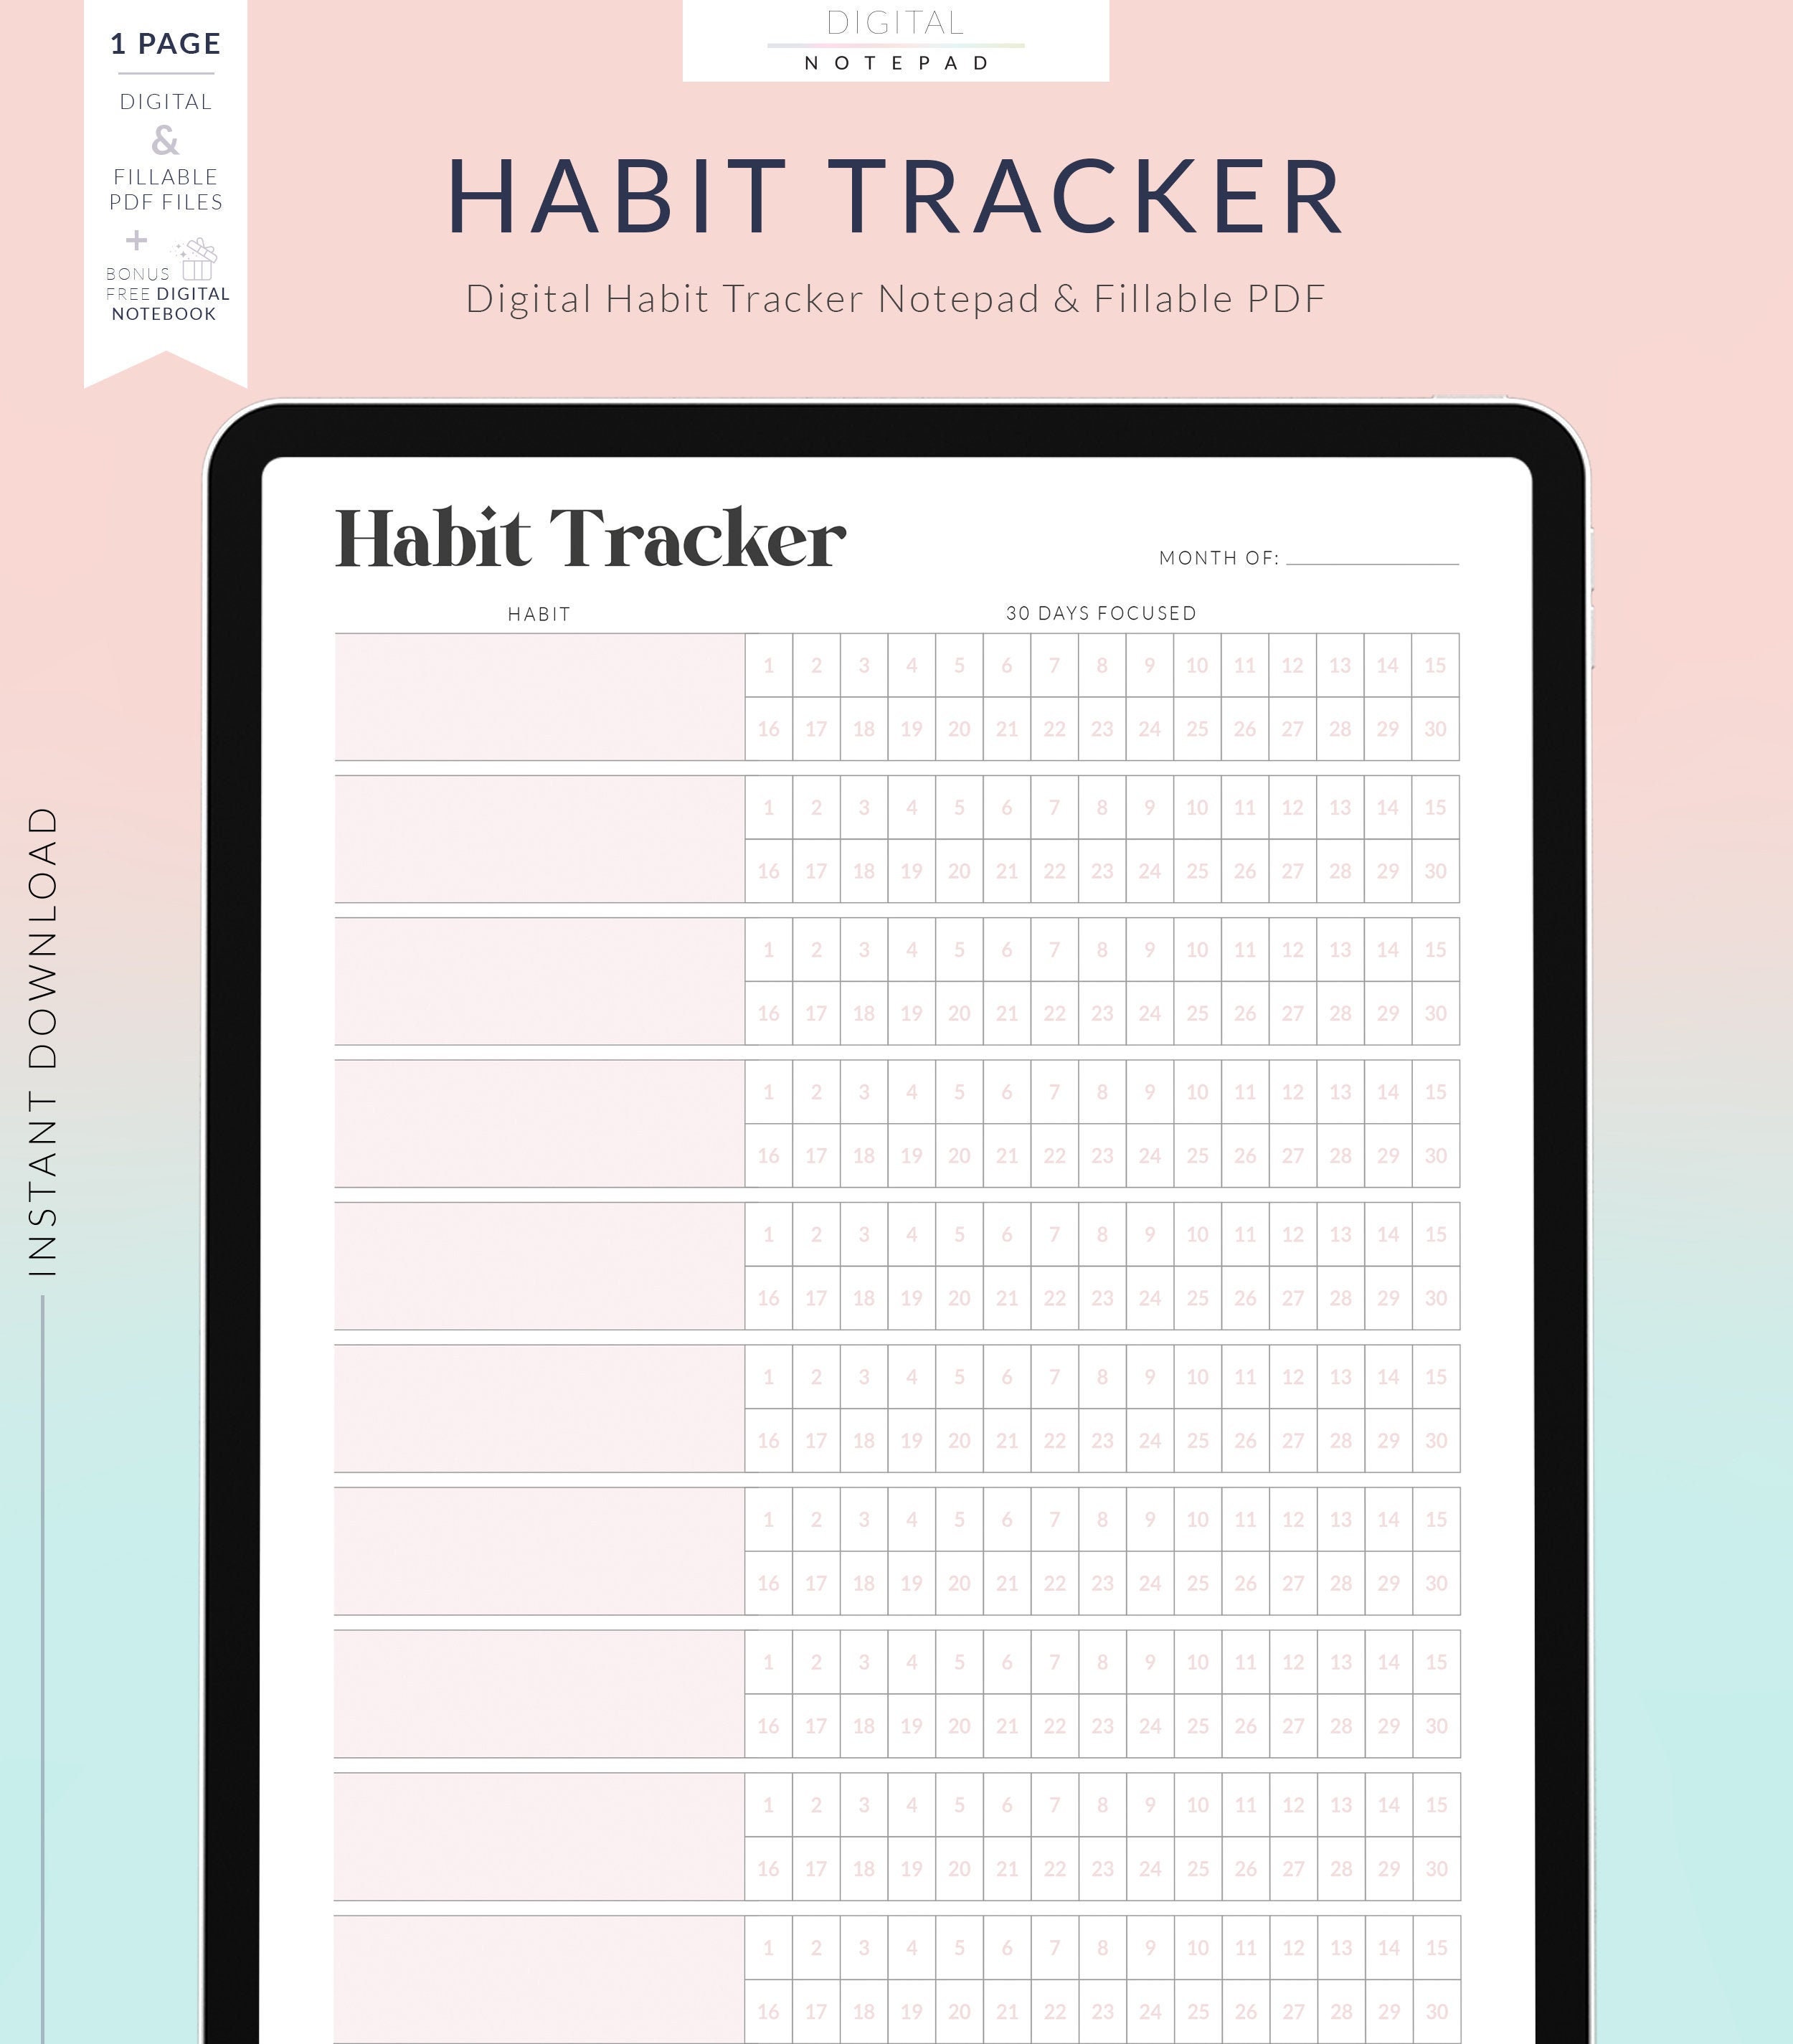 Paper Paper And Party Supplies The Habit Tracker Digital Planner Digital